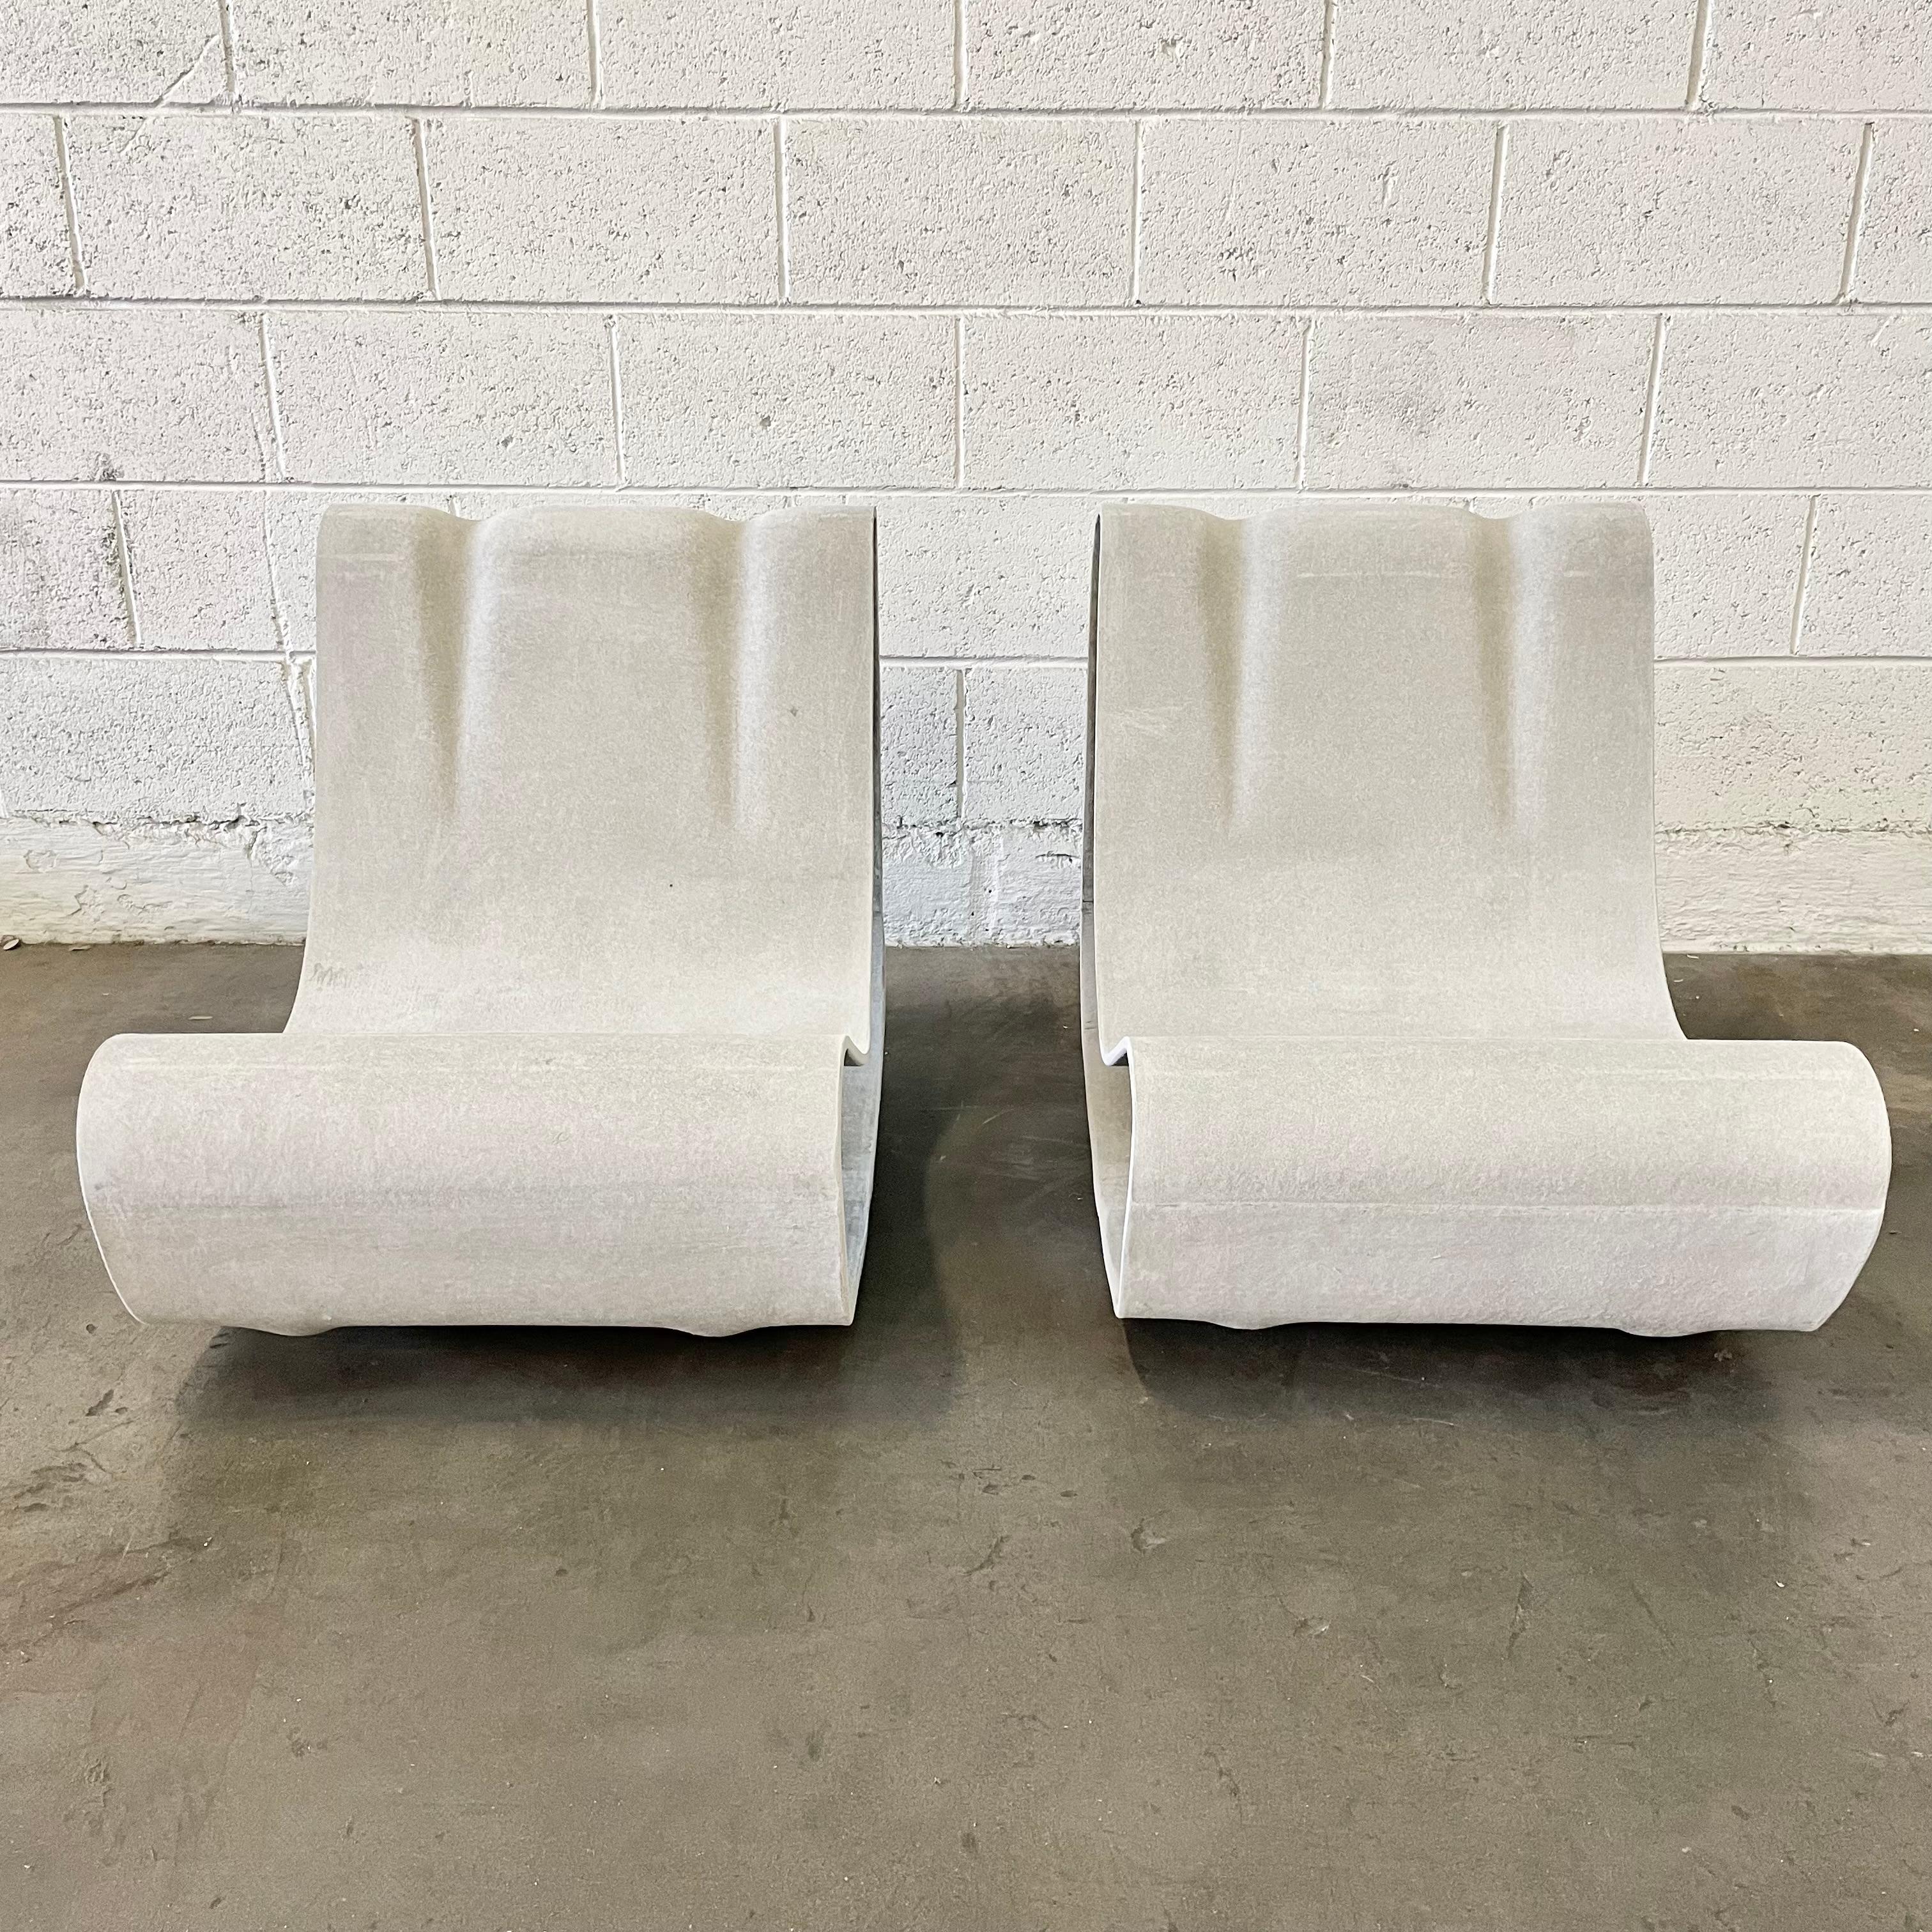 Fantastic pair of cement chairs by Swiss designer Willy Guhl for Eternit. Brand new. Hand made in Switzerland. Newly produced. Priced as a pair. One of the most iconic chairs ever designed.
 